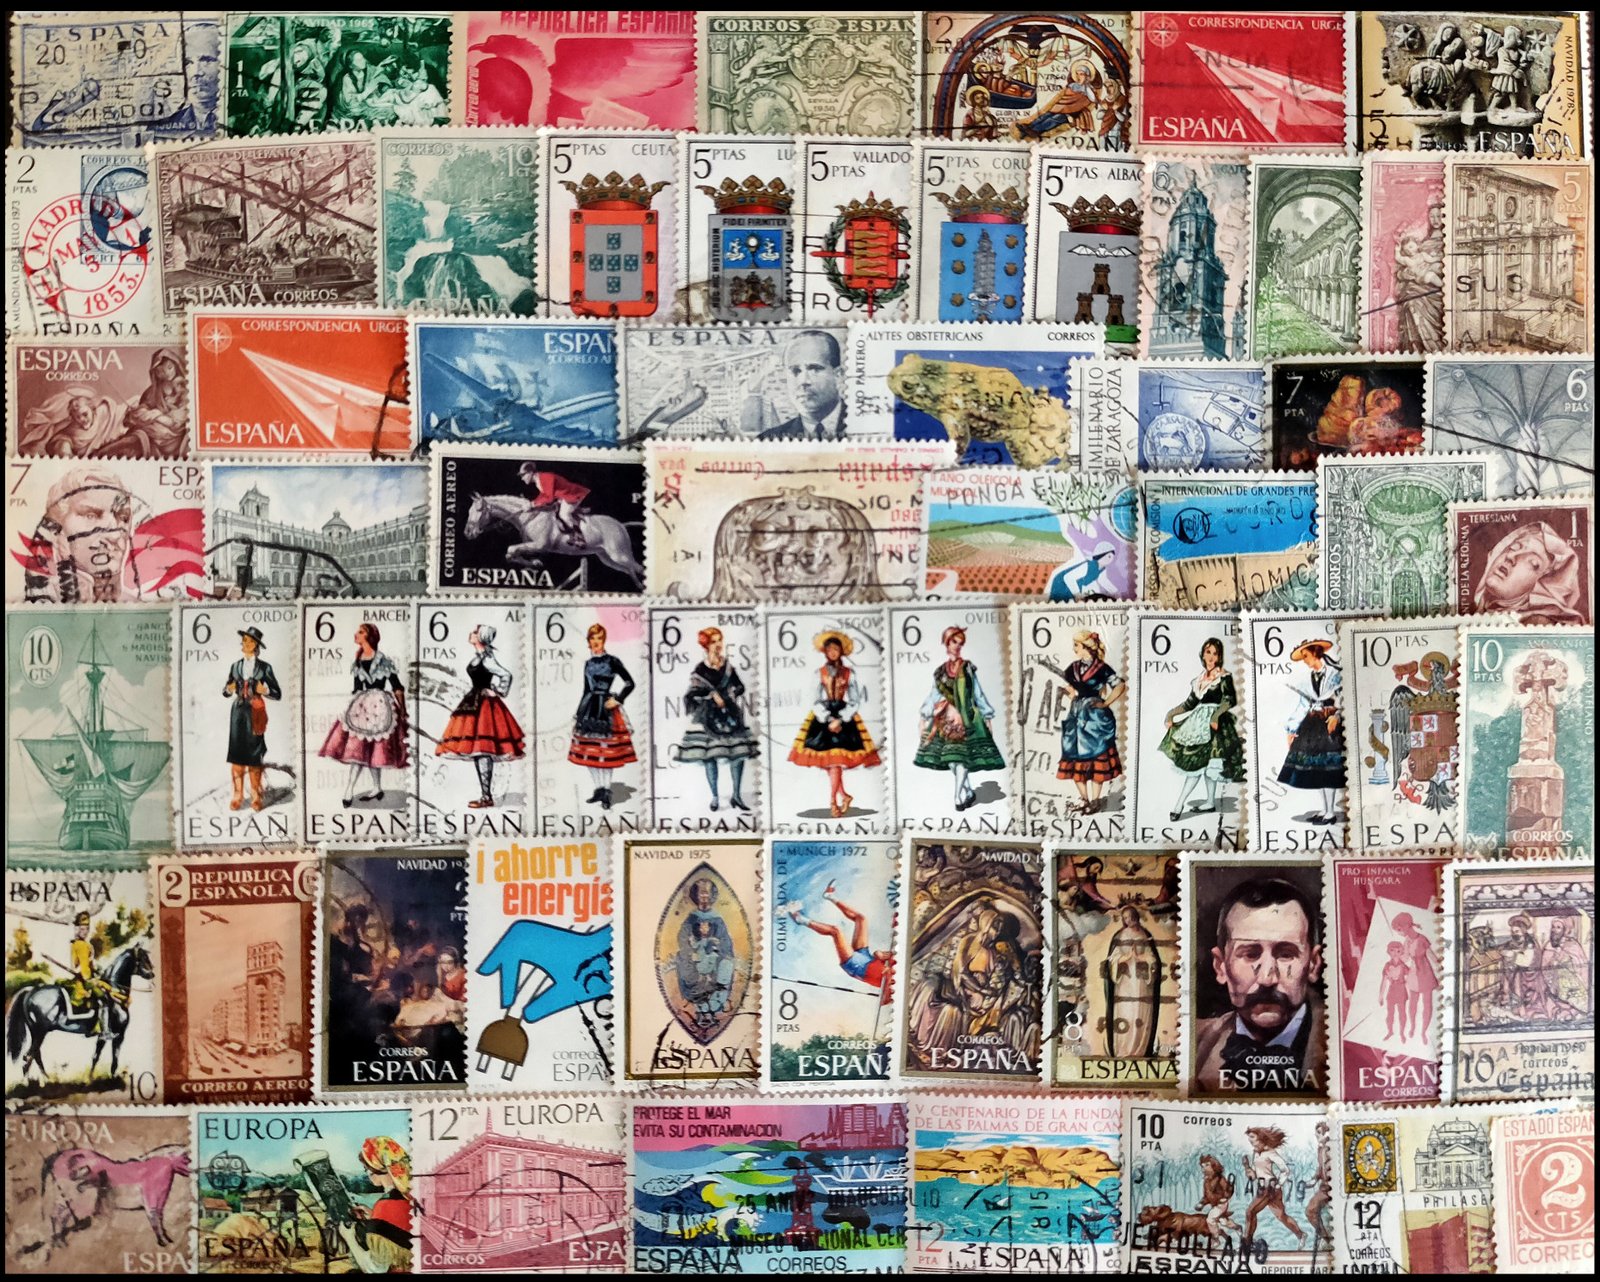 SPAIN 550 All Different Used Stamp, Large & Small, Old & New